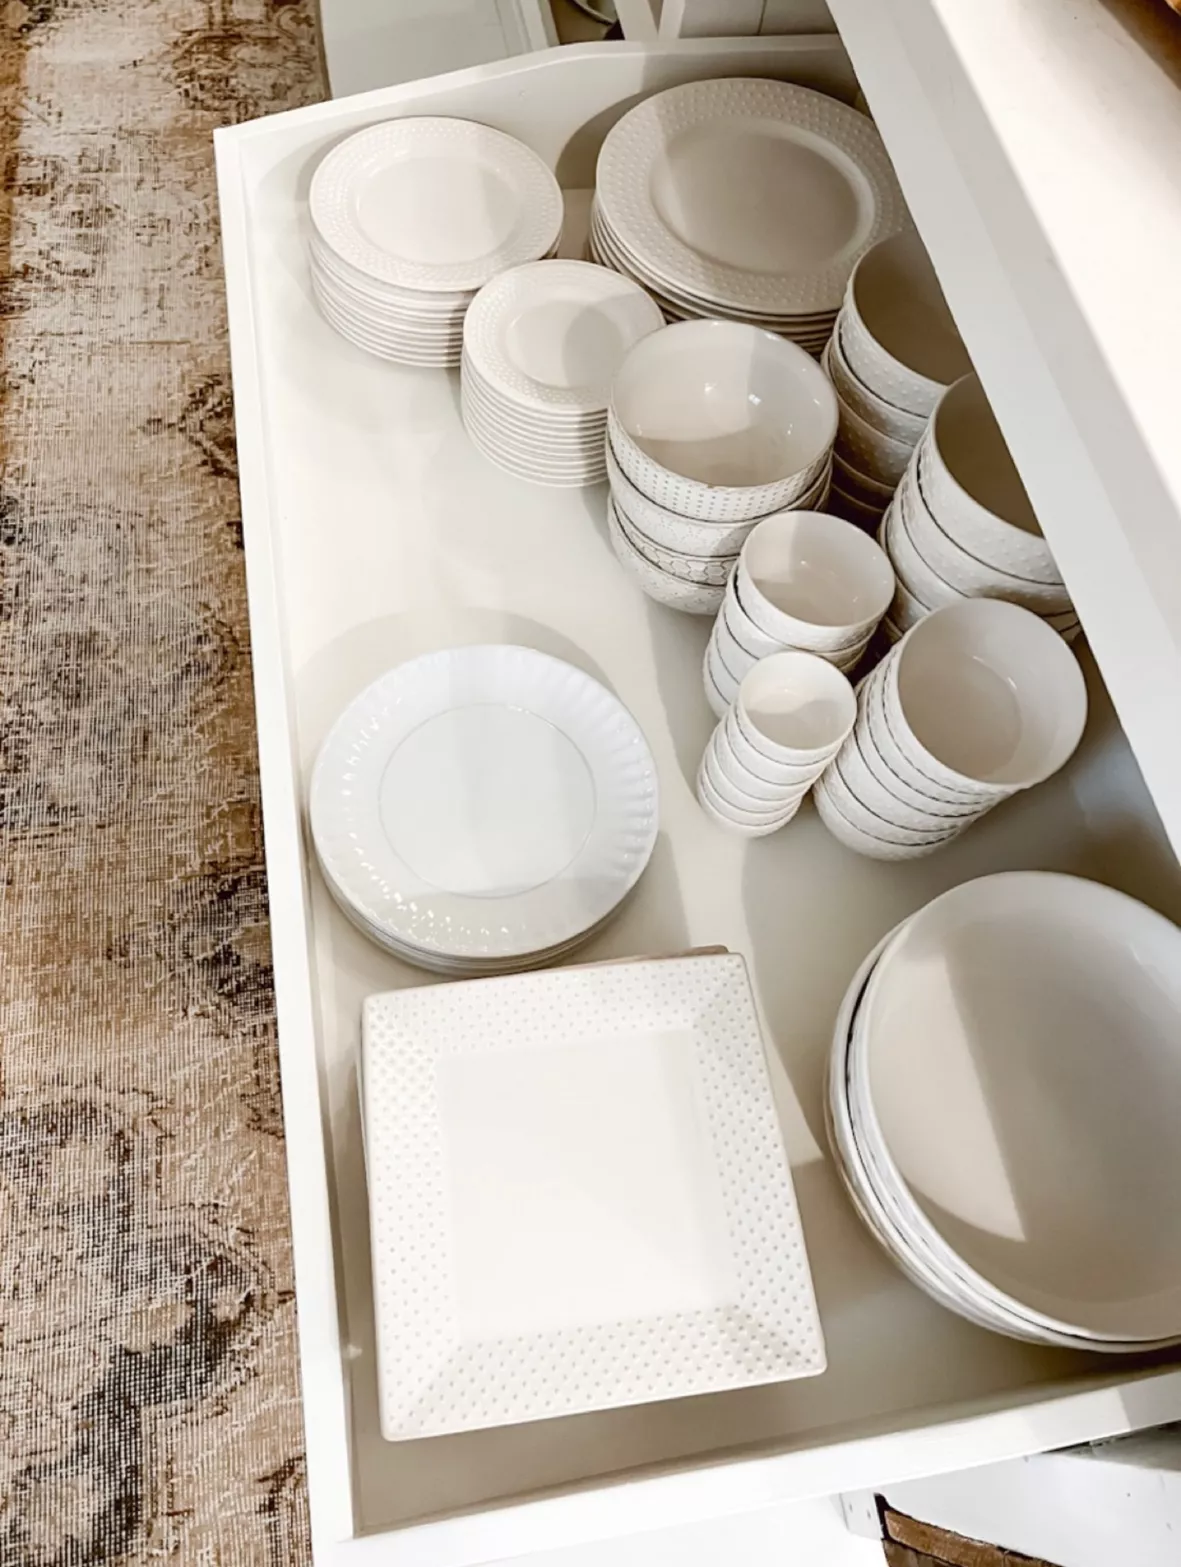 KooK Ceramic Nesting Bowls with Lids, Food Storage Containers